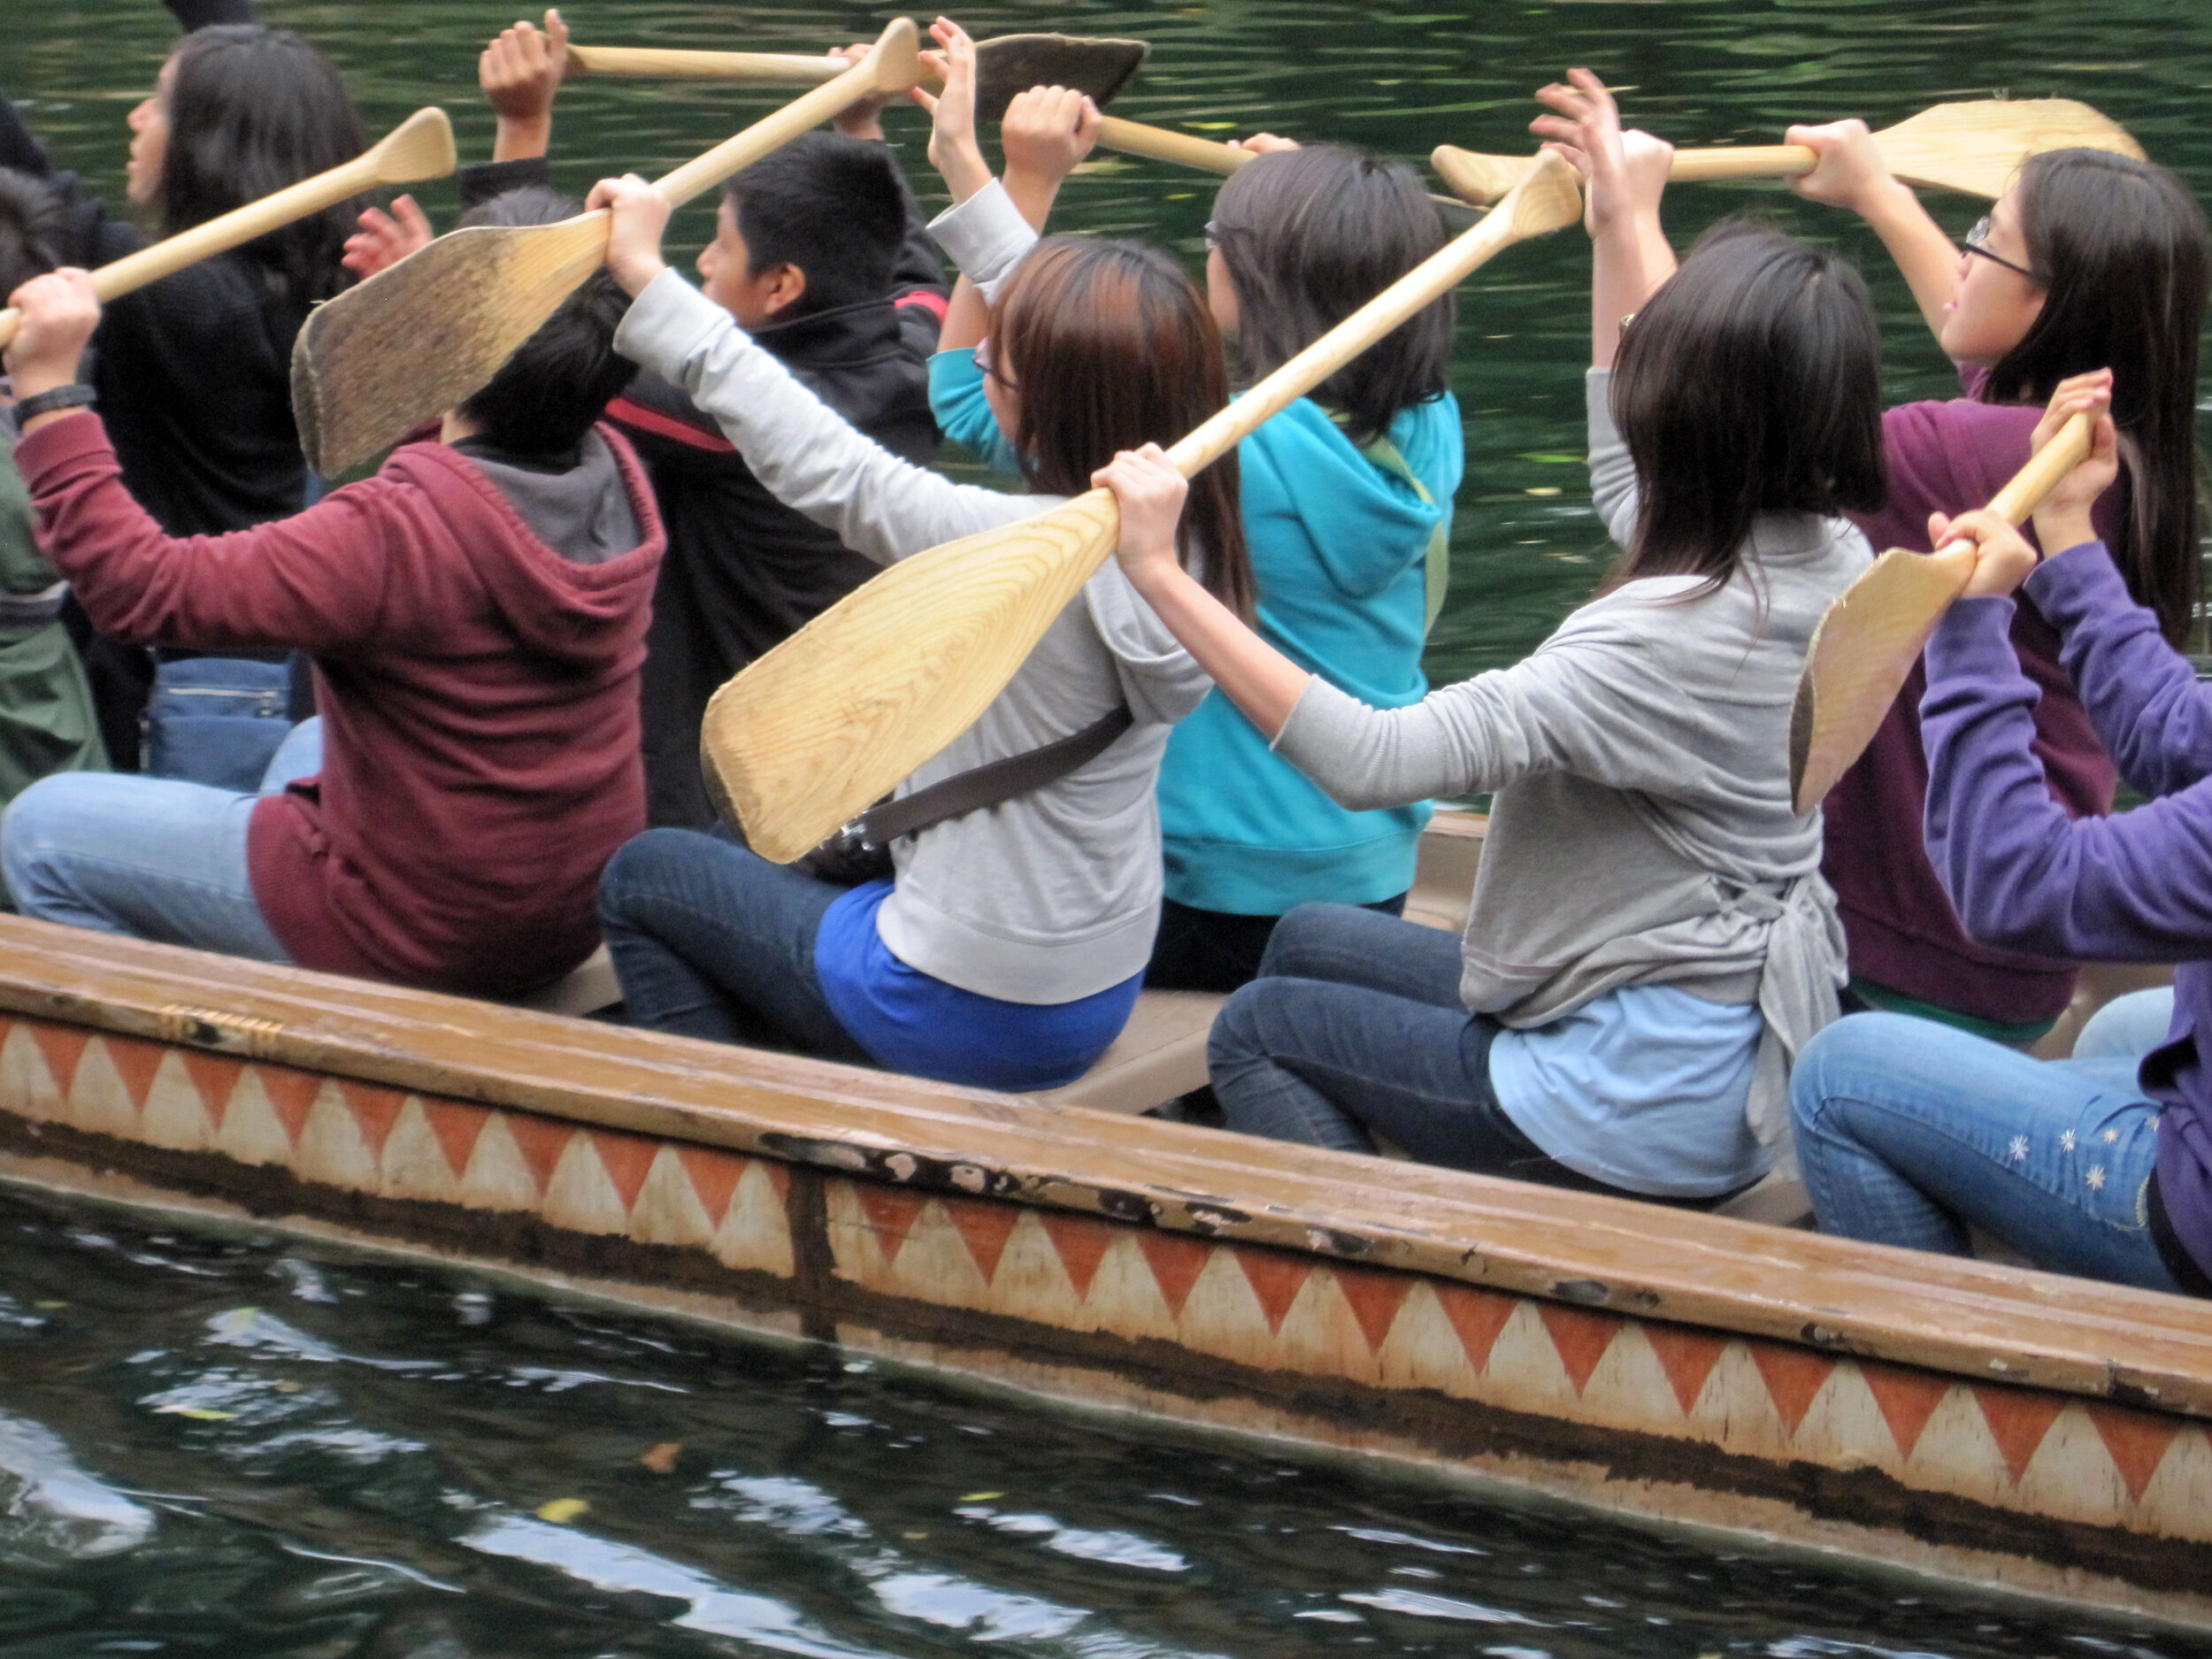  Hobart Shakespeareans paddle together 